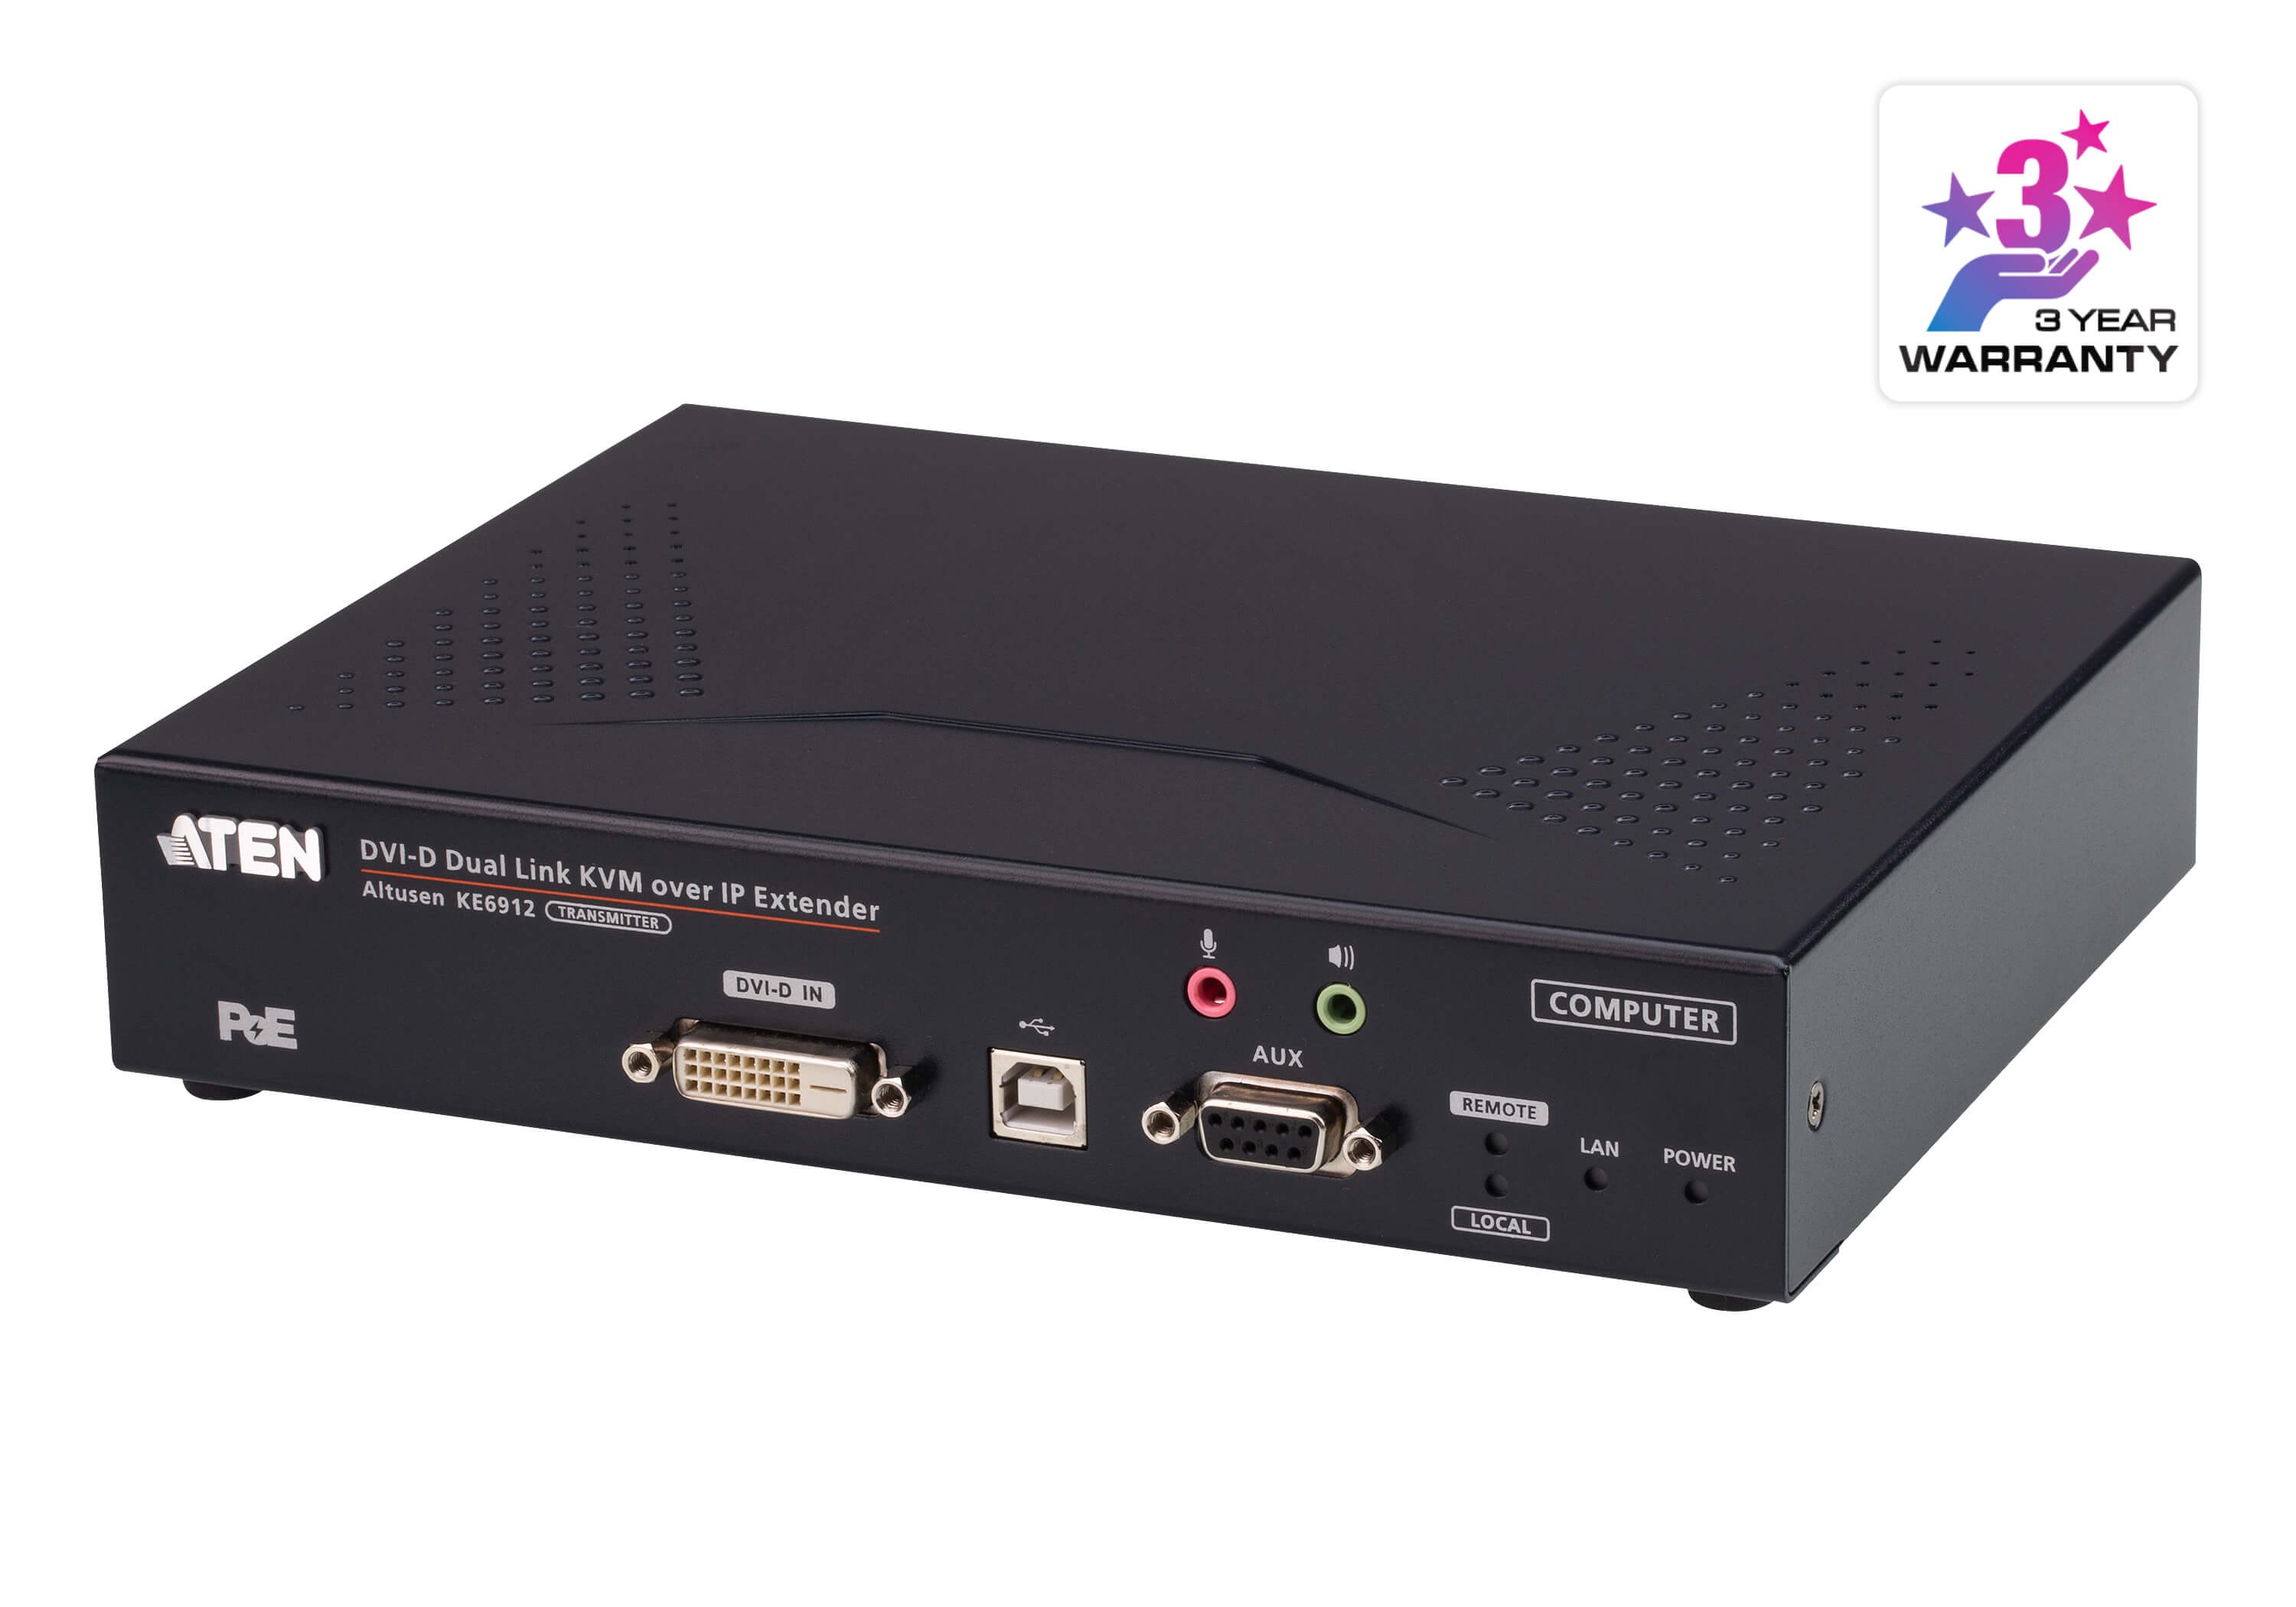 KE6912T  USB 2K DVI-D Dual Link KVM over IP Transmitter with Local Console, Power/LAN Redundancy (SFP Slot - PoE), RS-232 Control and Aud